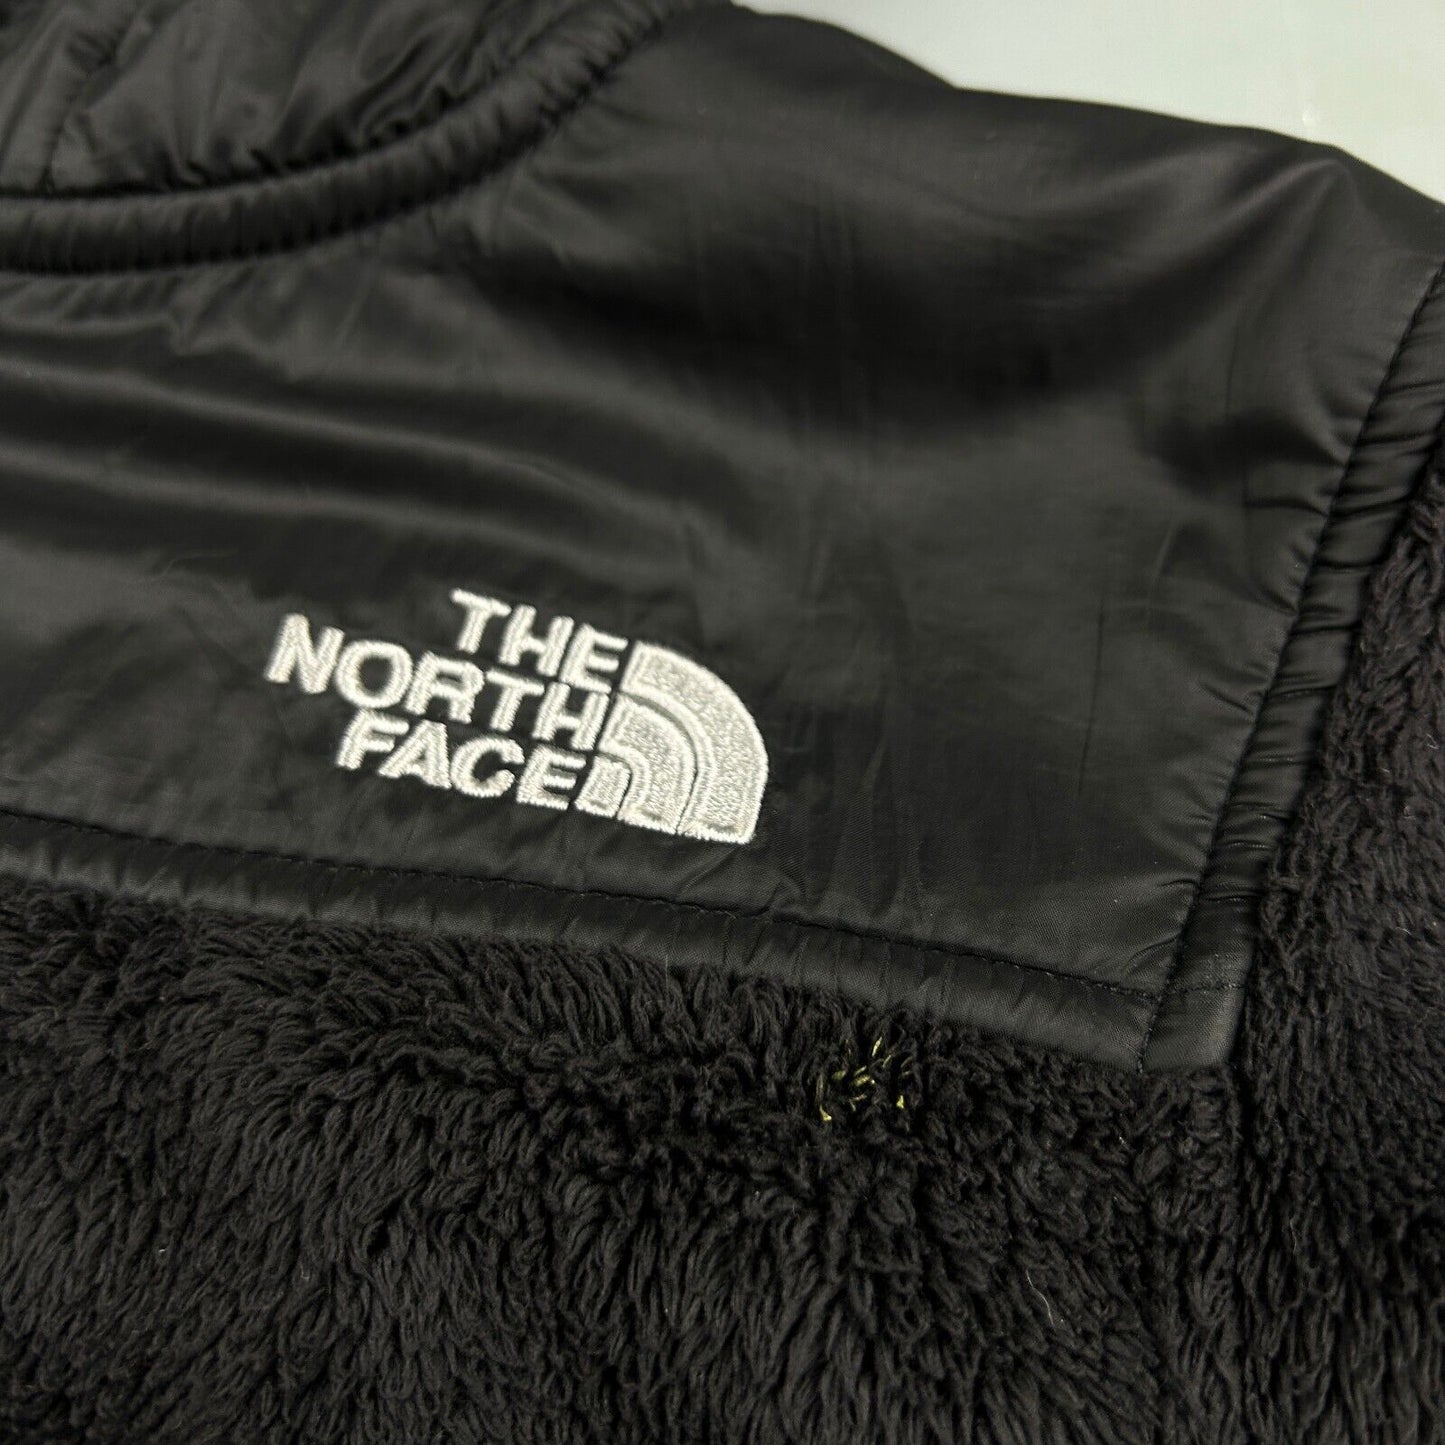 VINTAGE The North Face Black Hooded Fleece Sweater sz XS Womens Adult